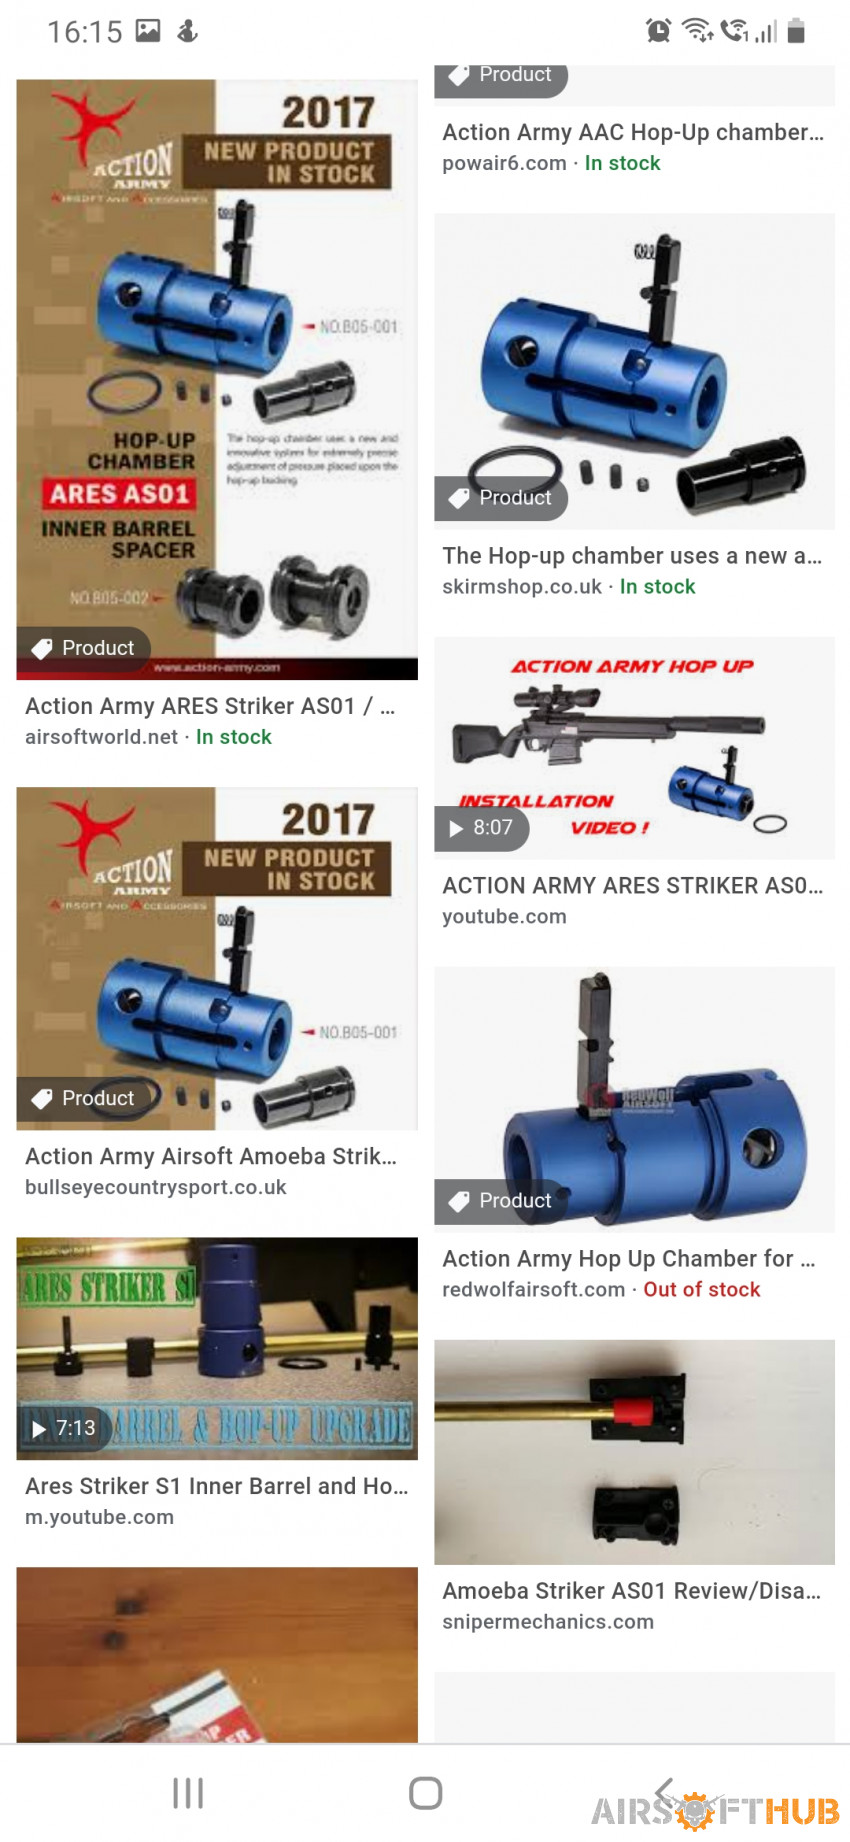 Ares striker AS02 upgrades - Used airsoft equipment